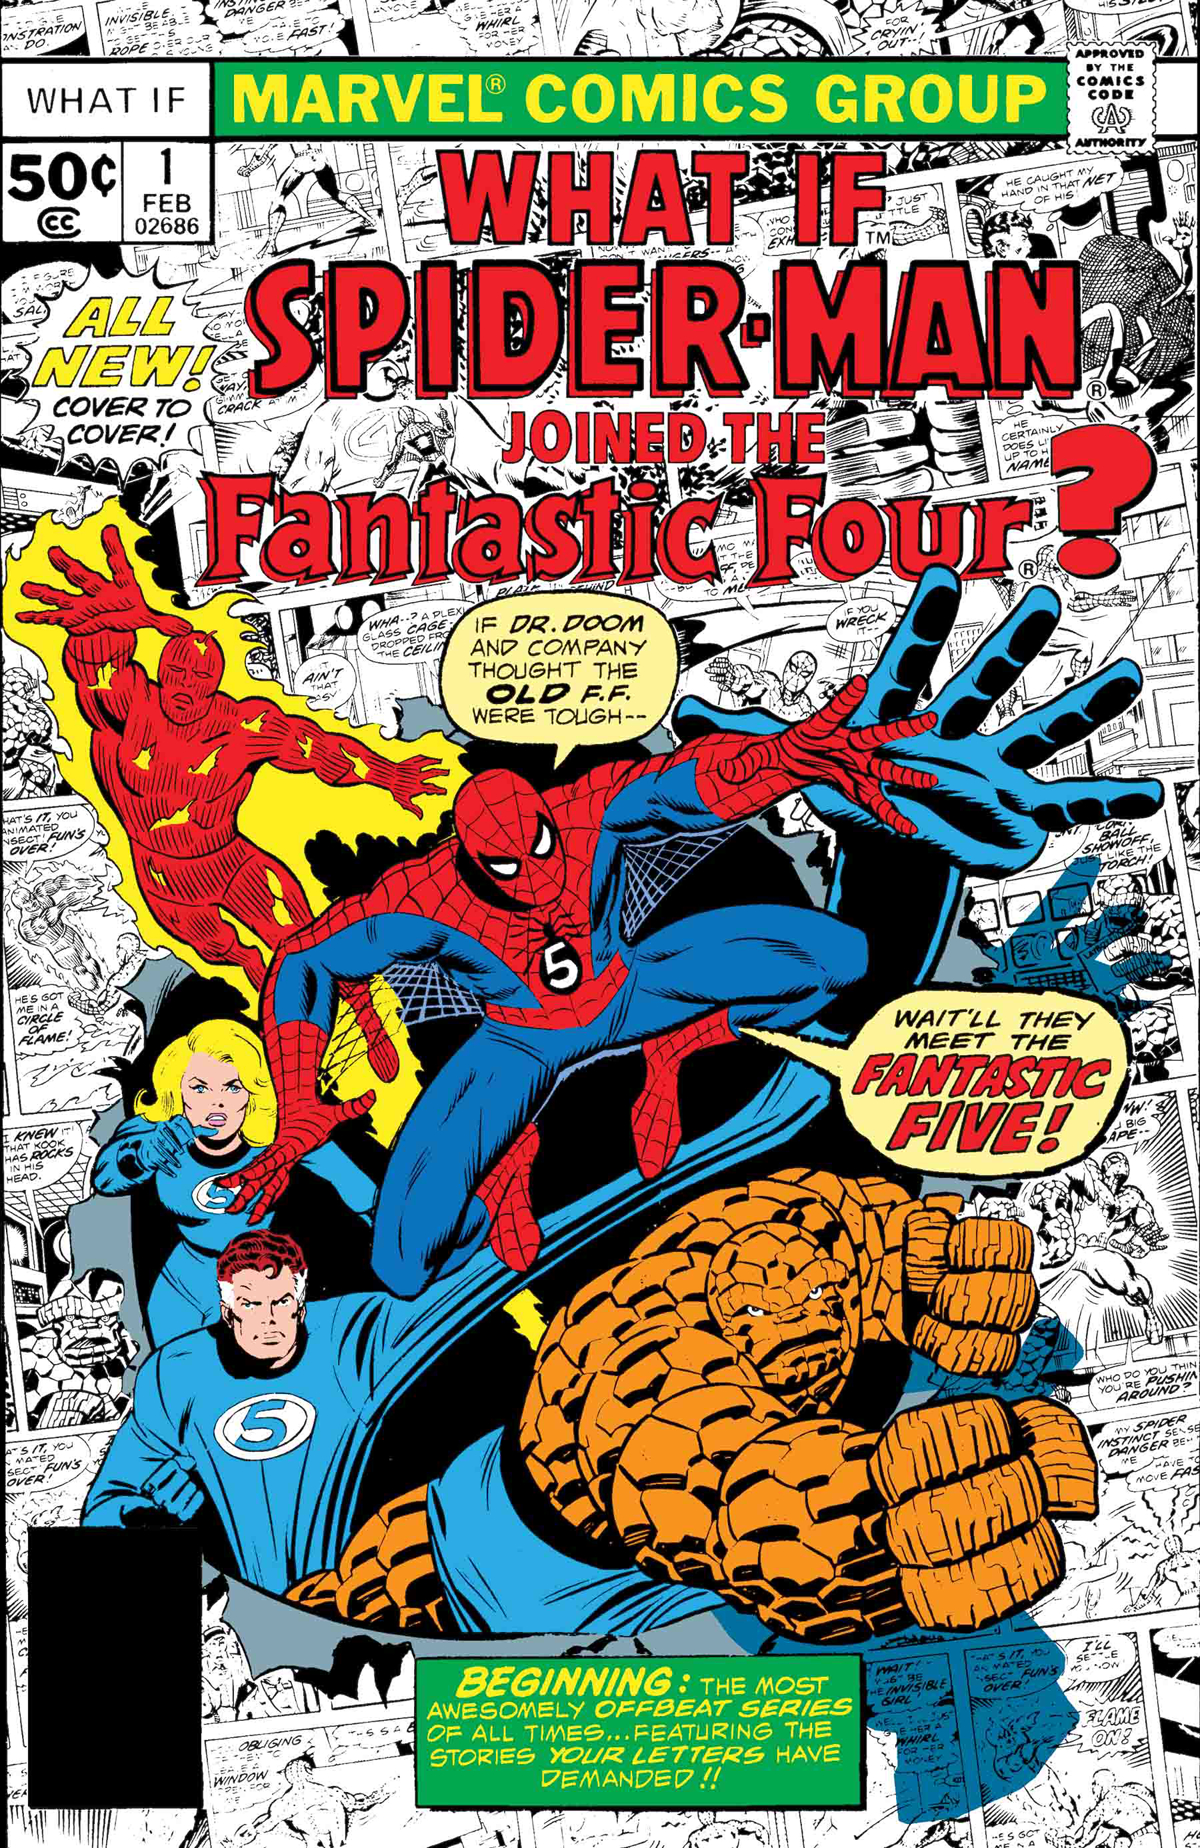 TRUE BELIEVERS FANTASTIC FOUR WHAT IF? #1